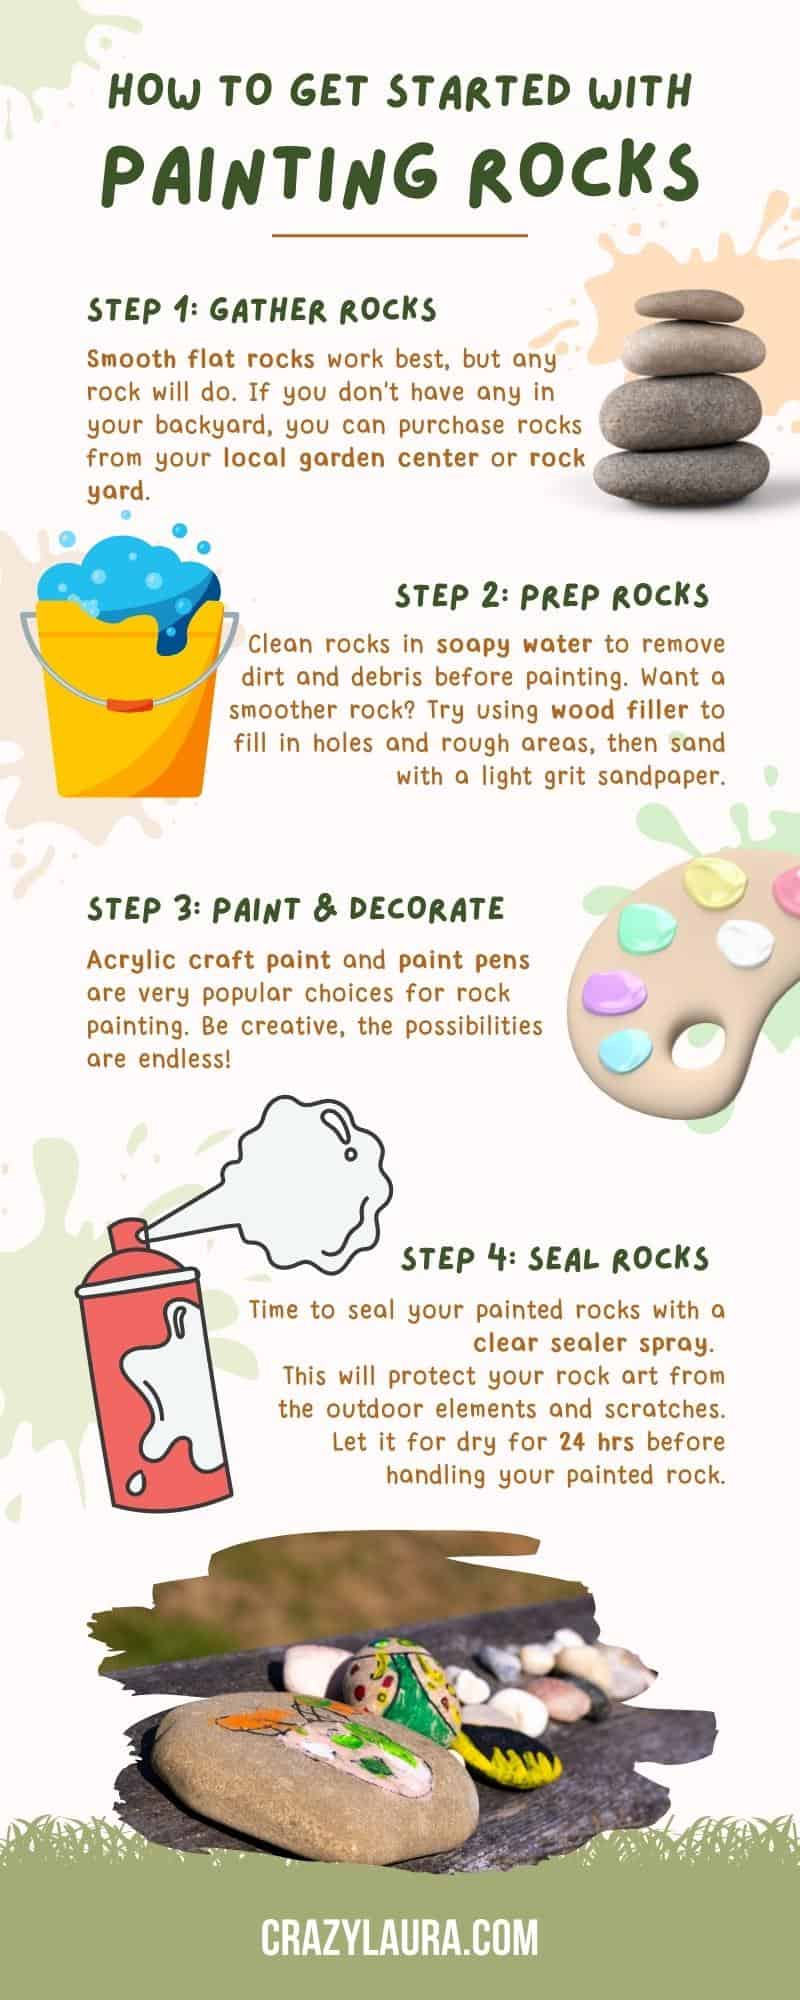 Learn how to paint rocks with this infographic